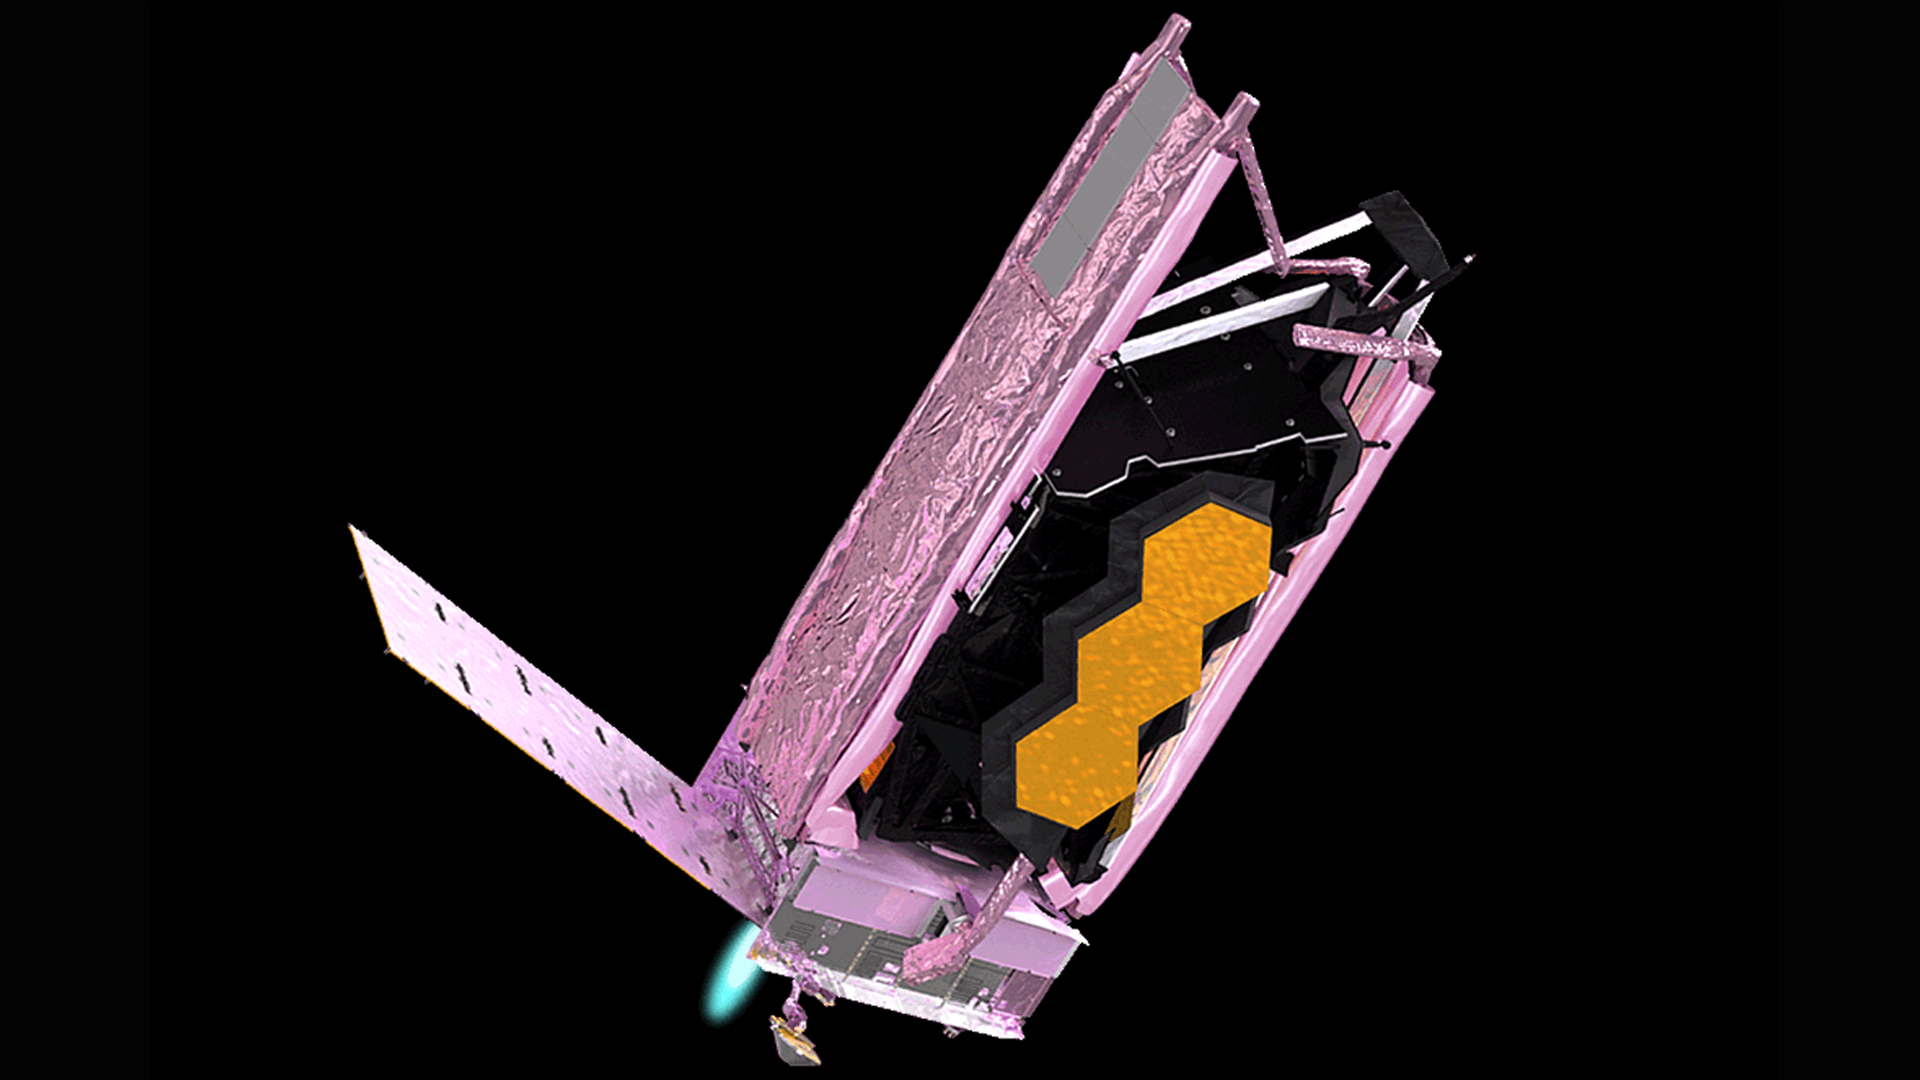 The James Webb Space Telescope fires its thruster in the second of three mid-course maneuvers in this NASA graphic.